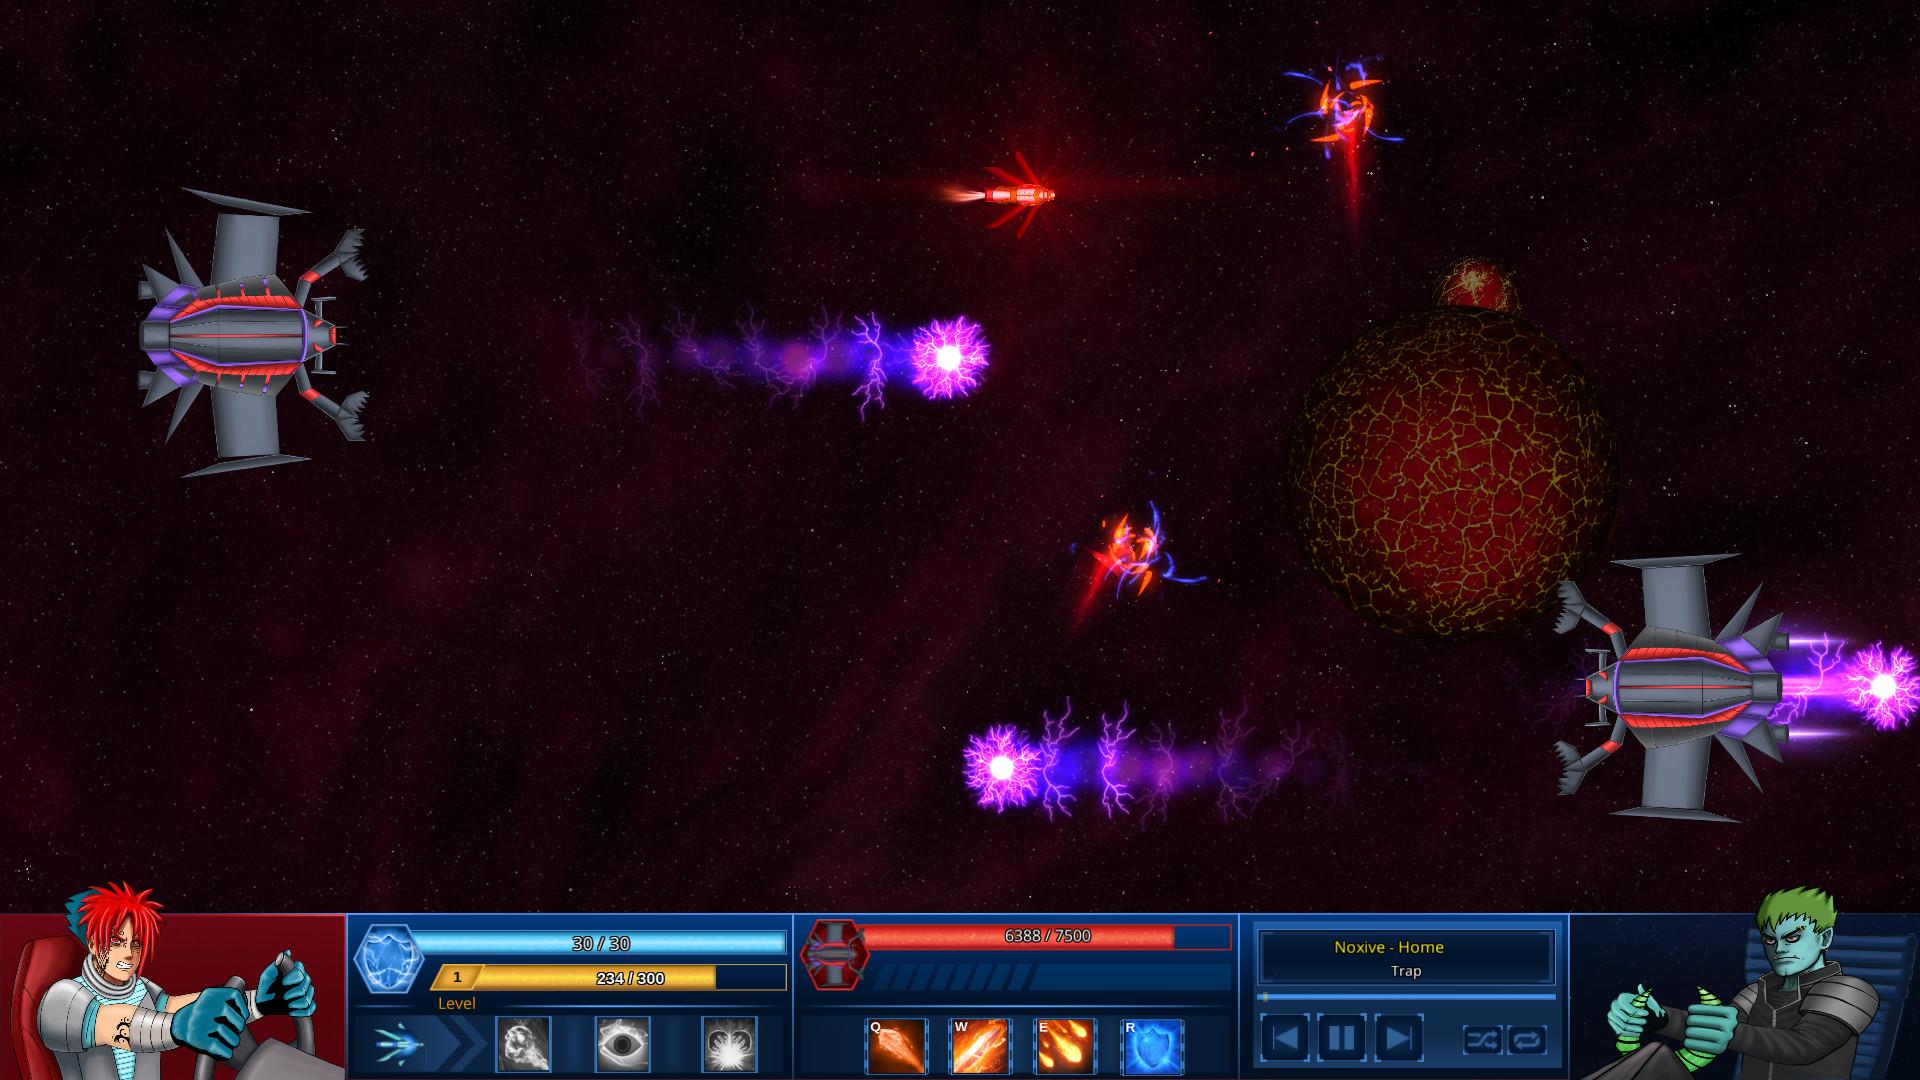 Screenshot №18 from game Survive in Space